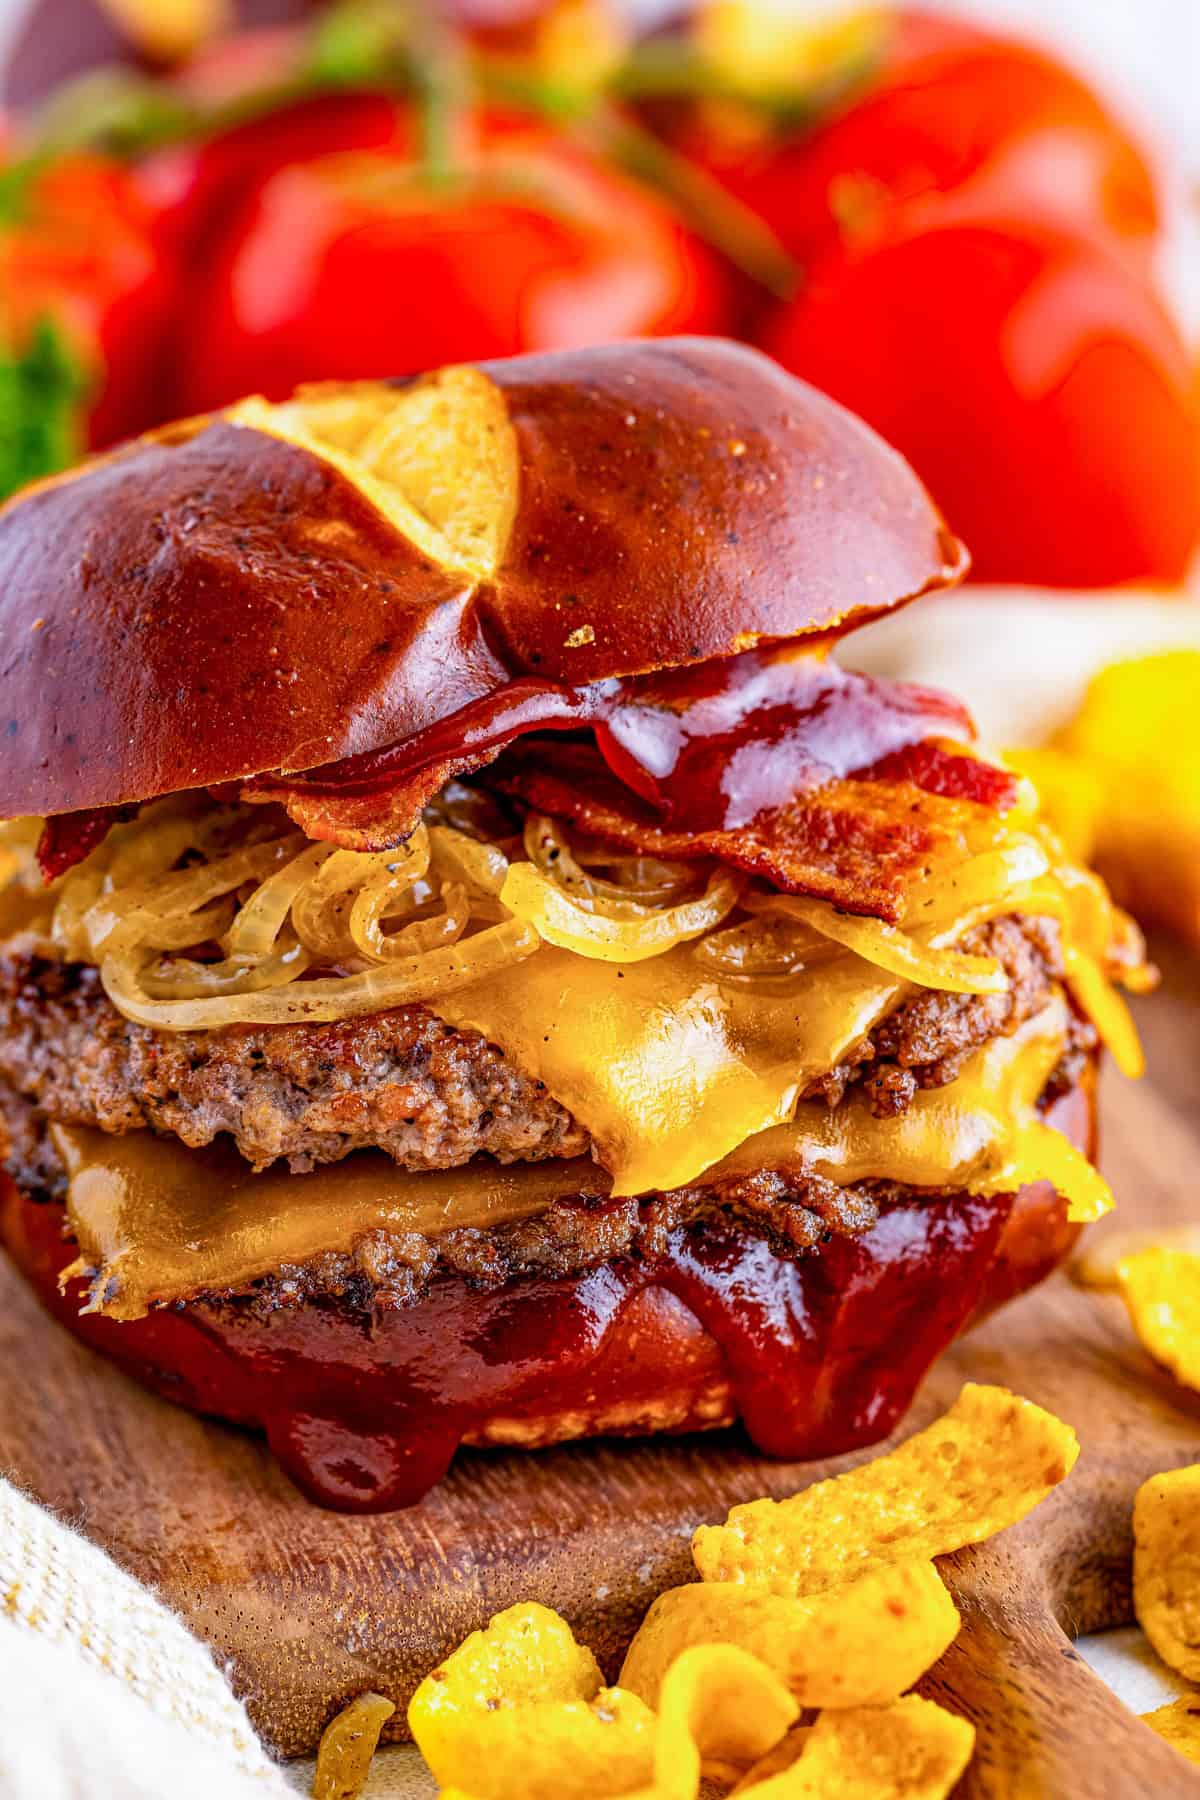 BBQ Bacon Burger with two patties topped with onions, bacon and bbq sauce on a pretzel bun.